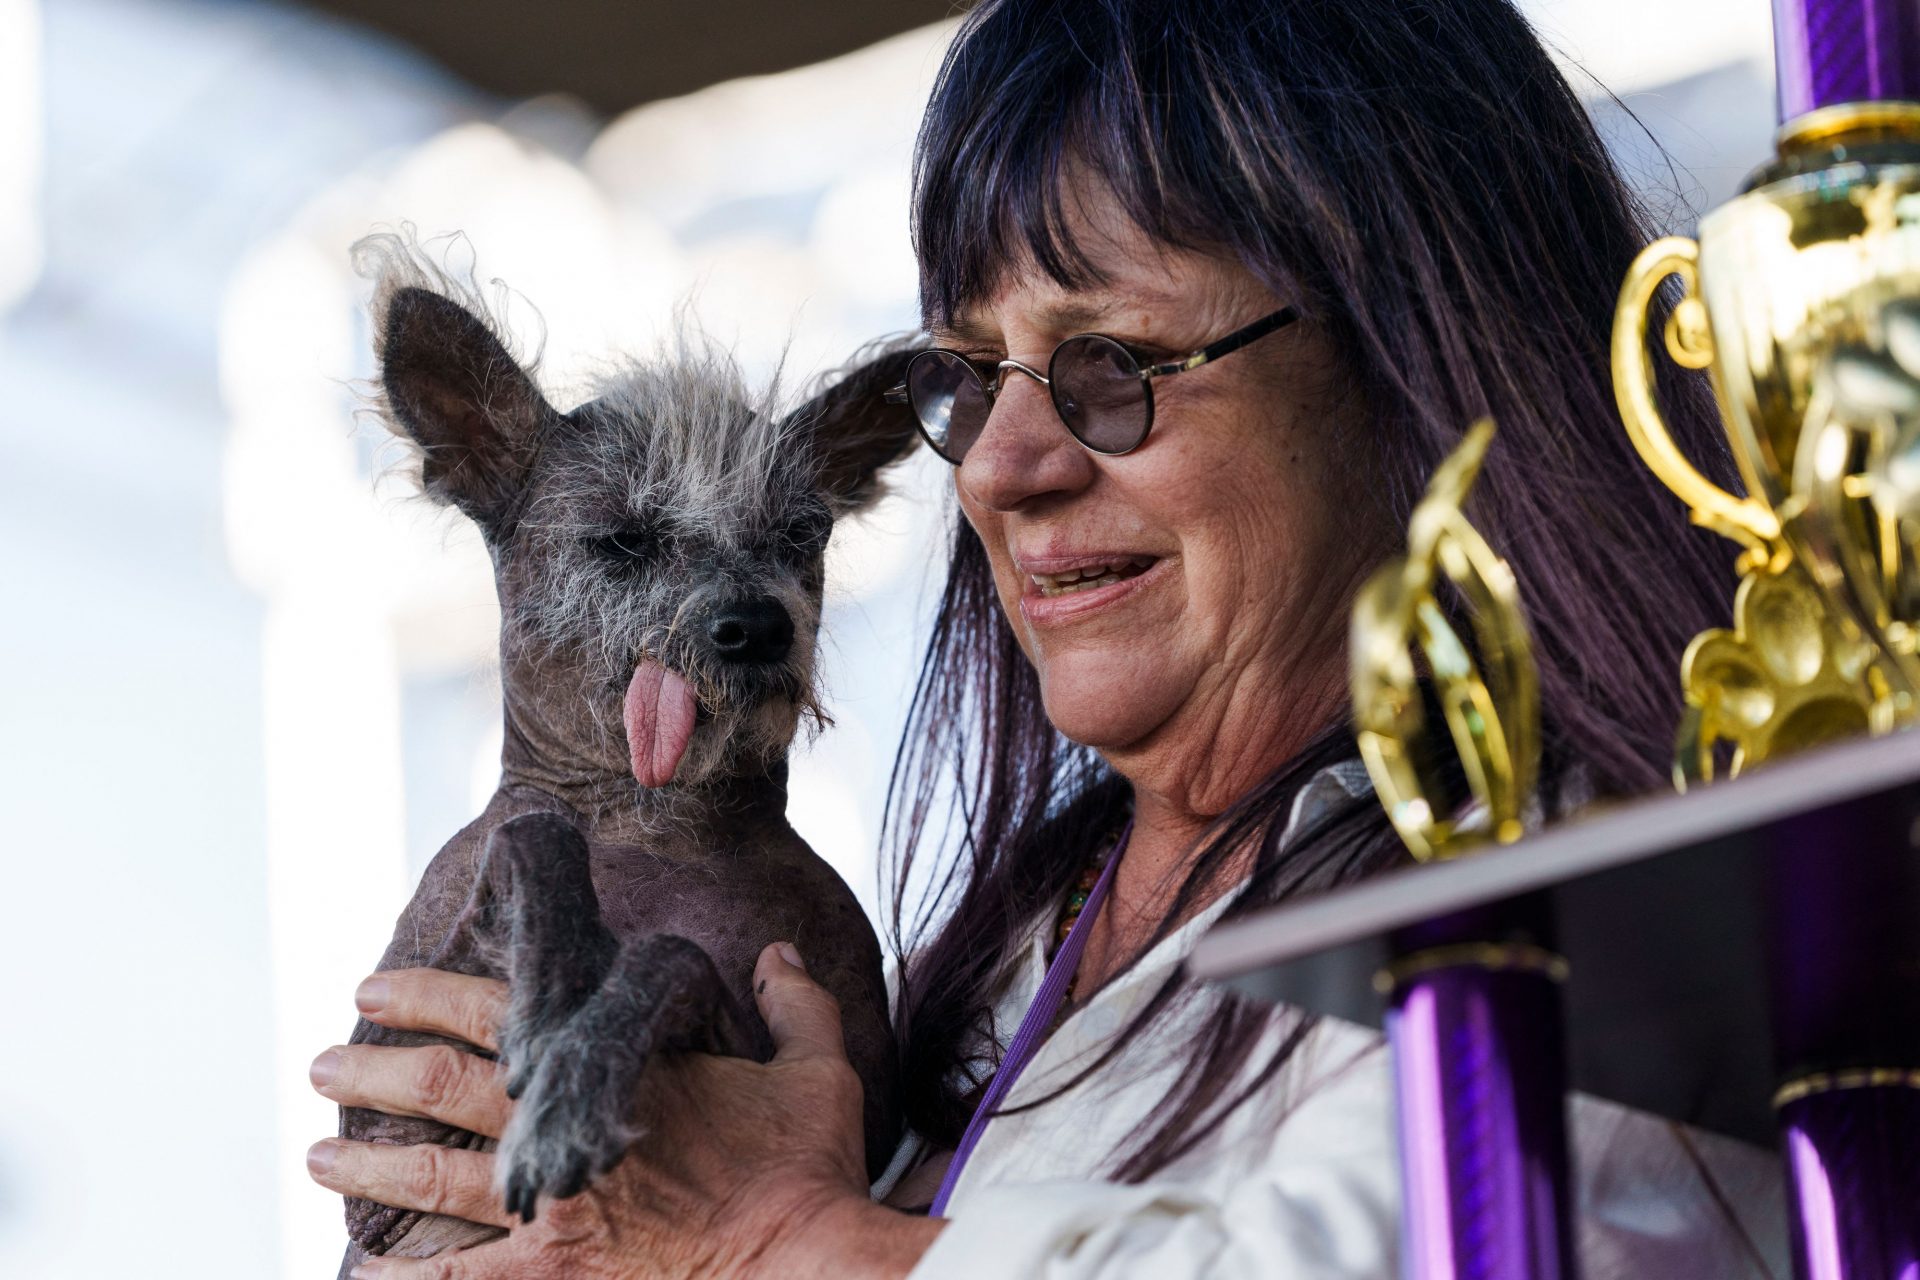 2023 in photos: The world's ugliest dog